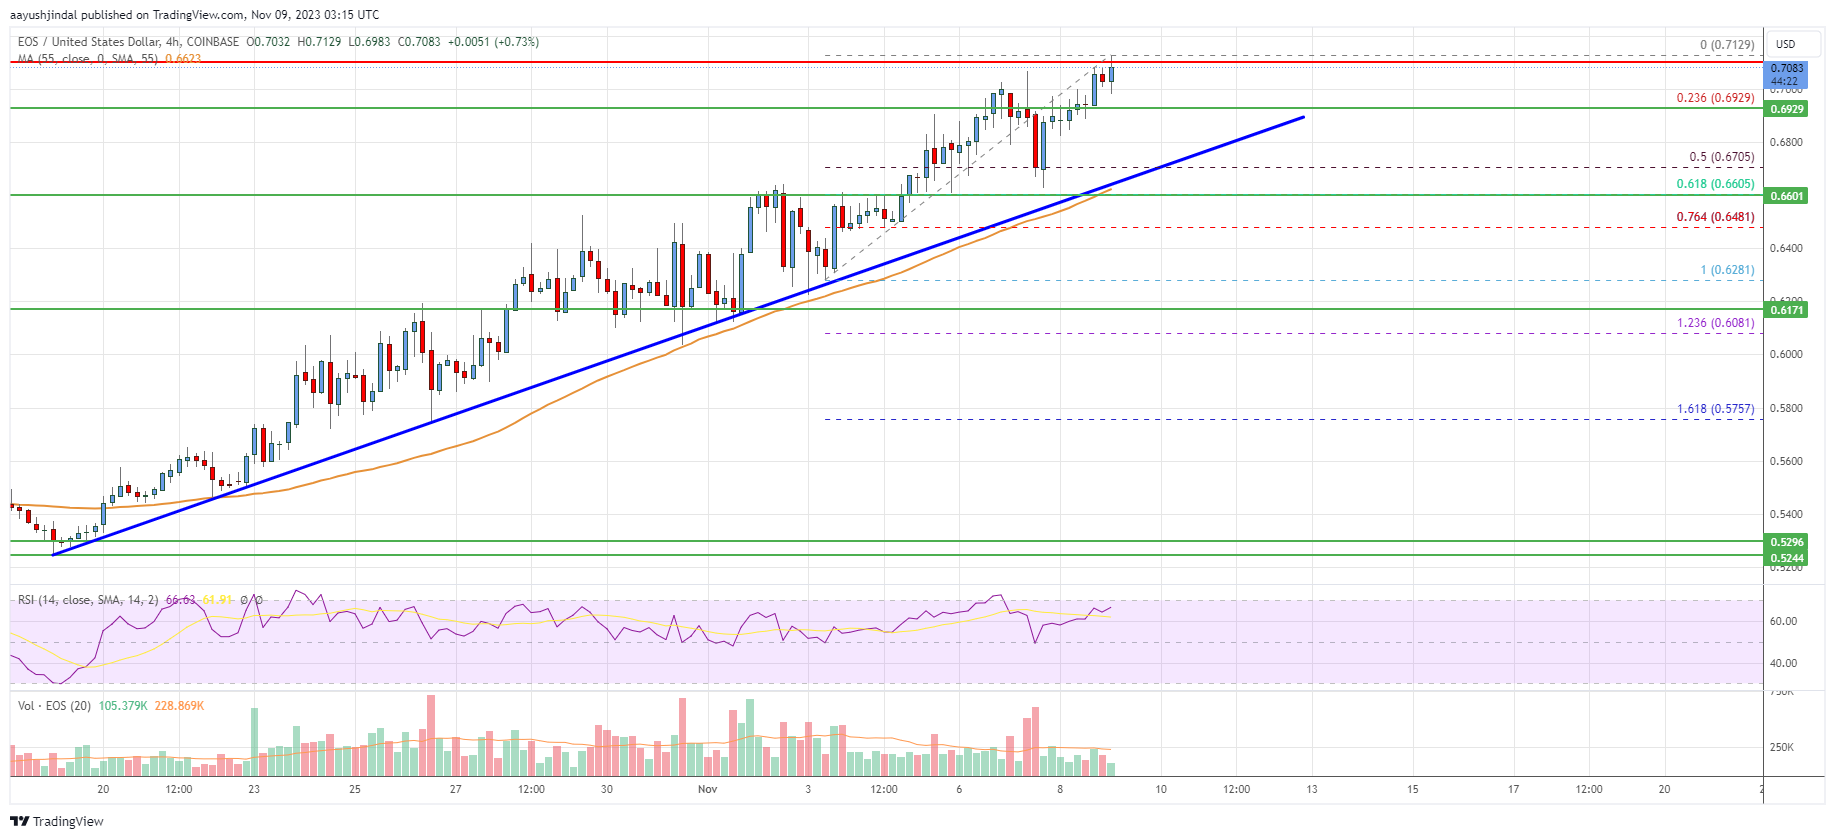 EOS Price Analysis: Rally Extends, Bulls Aim For $0.75